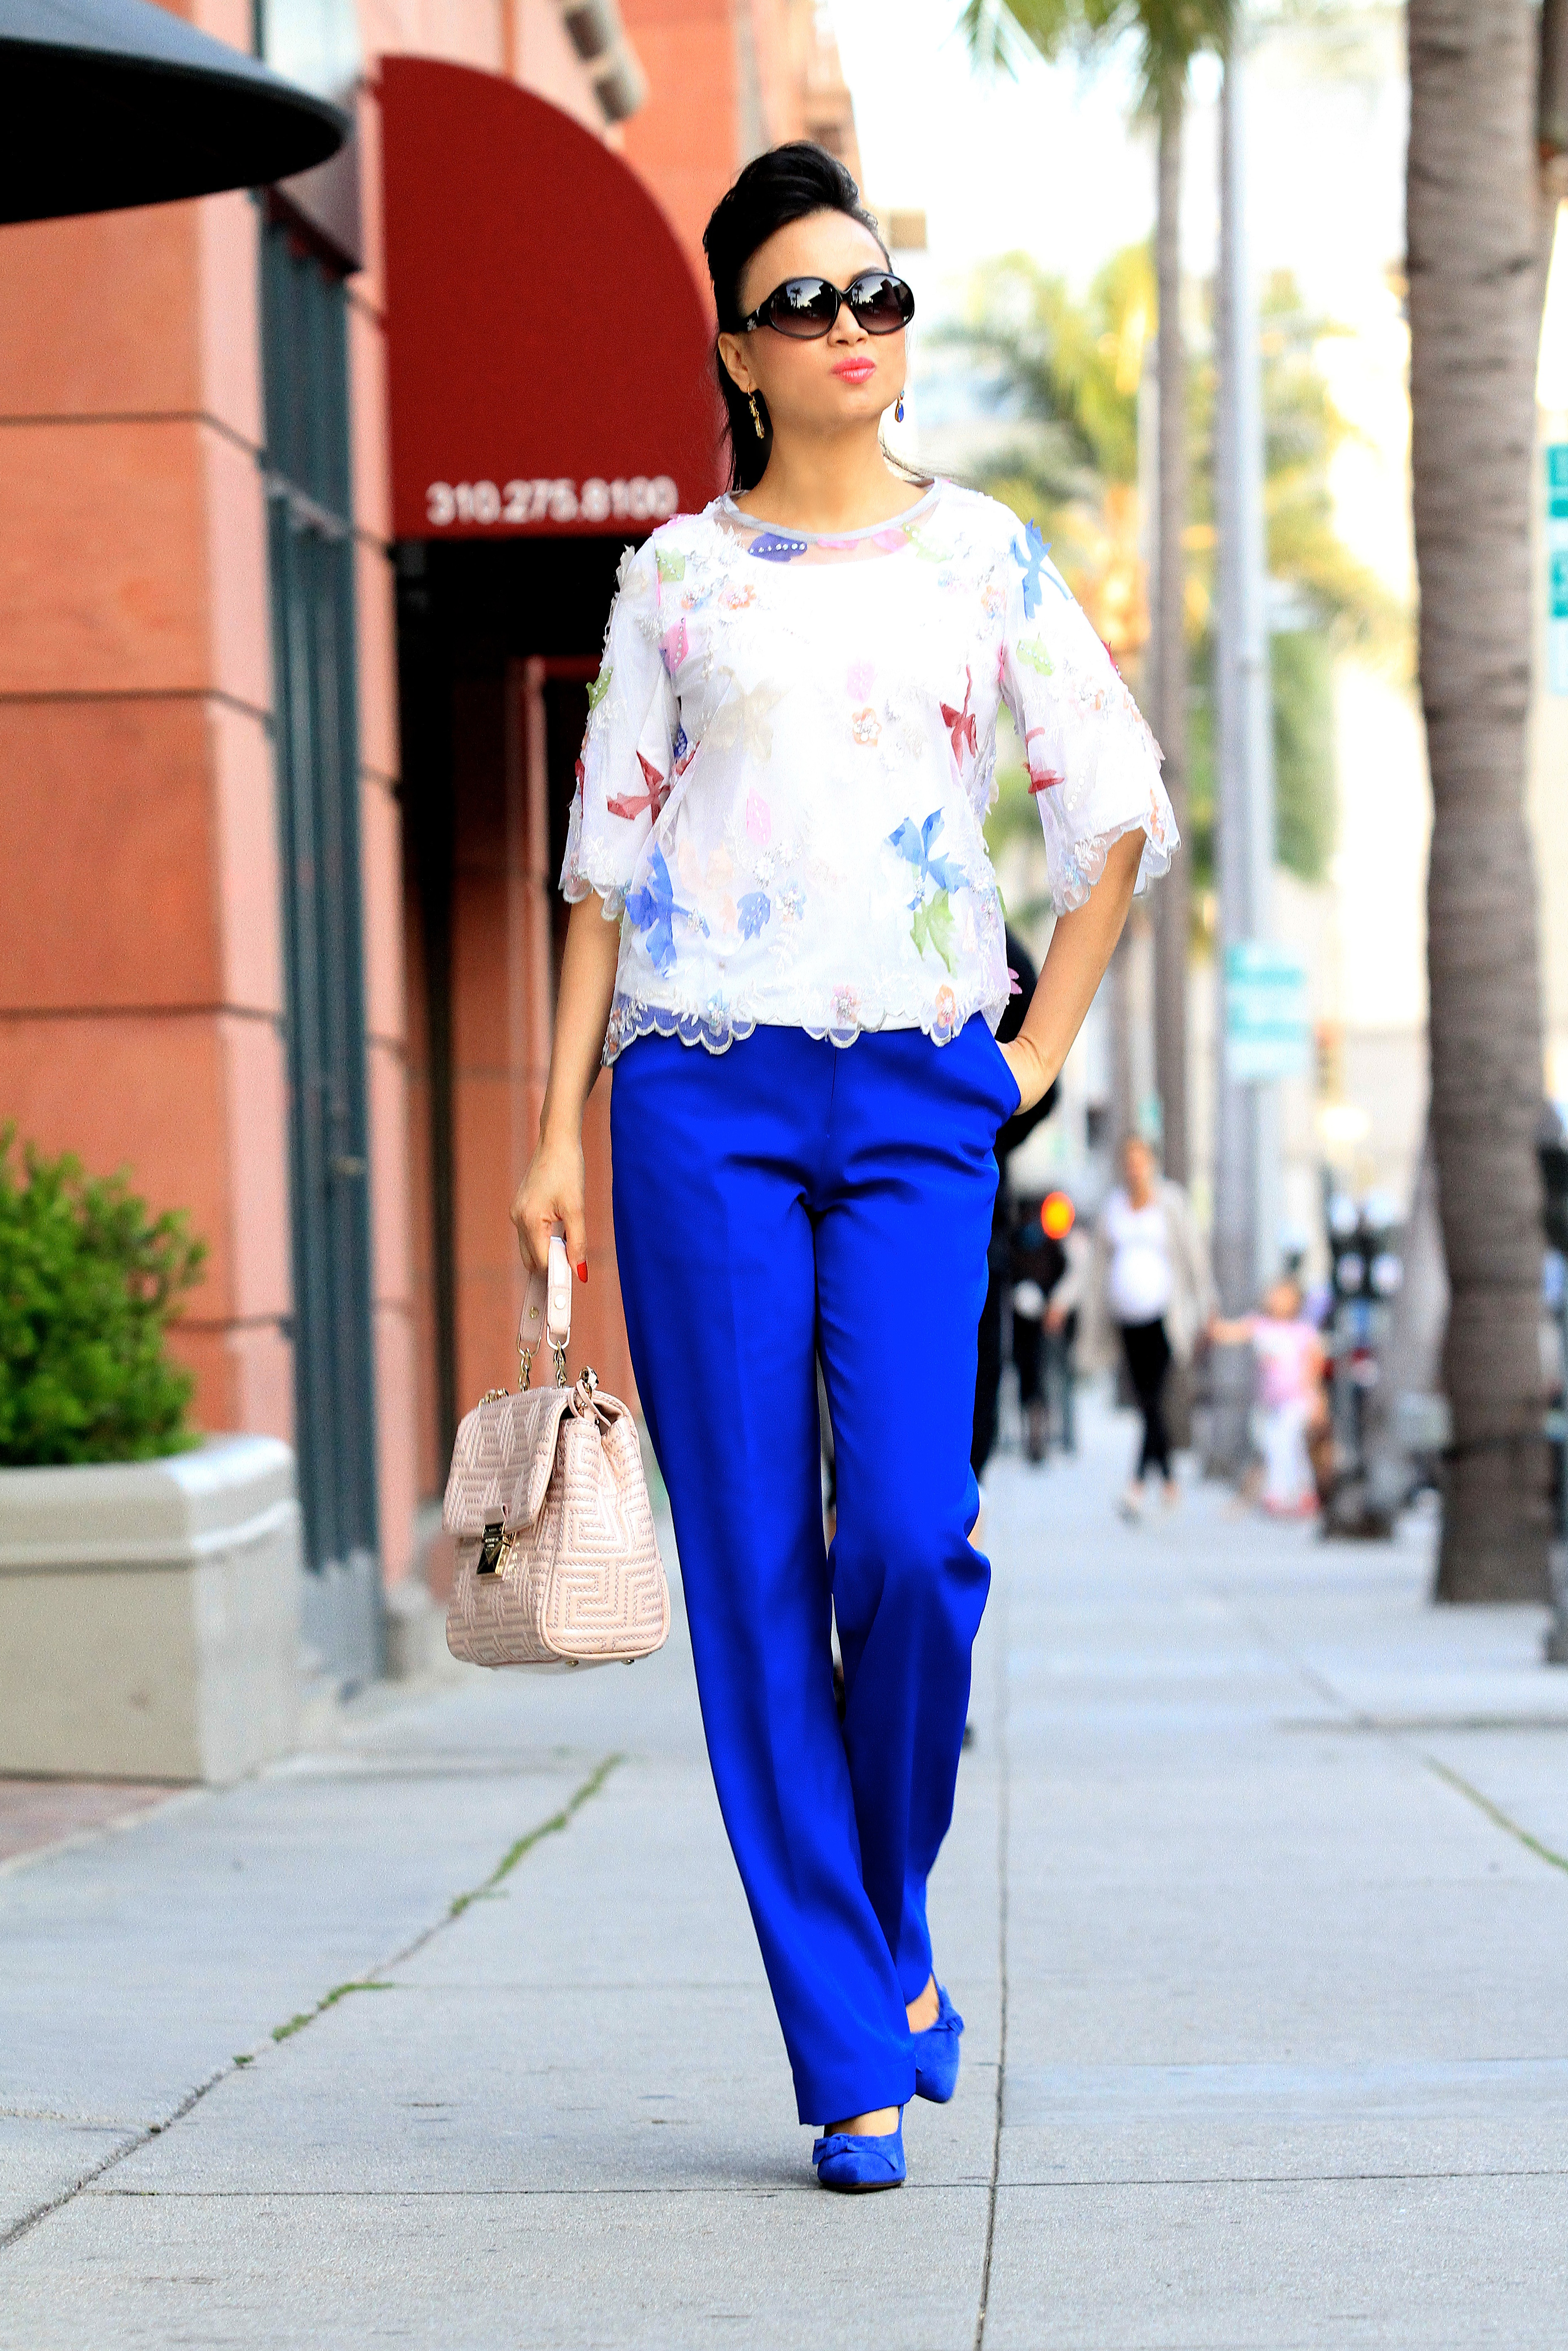 Picture - Ha Phuong Beverly Hills California United States, Tuesday 24th March 2015 http://www.contactmusic.com/pictures/7ae30cc9/ha-phuong-ha-phuong-walking-along-bedford-drive_4649381 www.haphuongworld.com www.haphuong.global